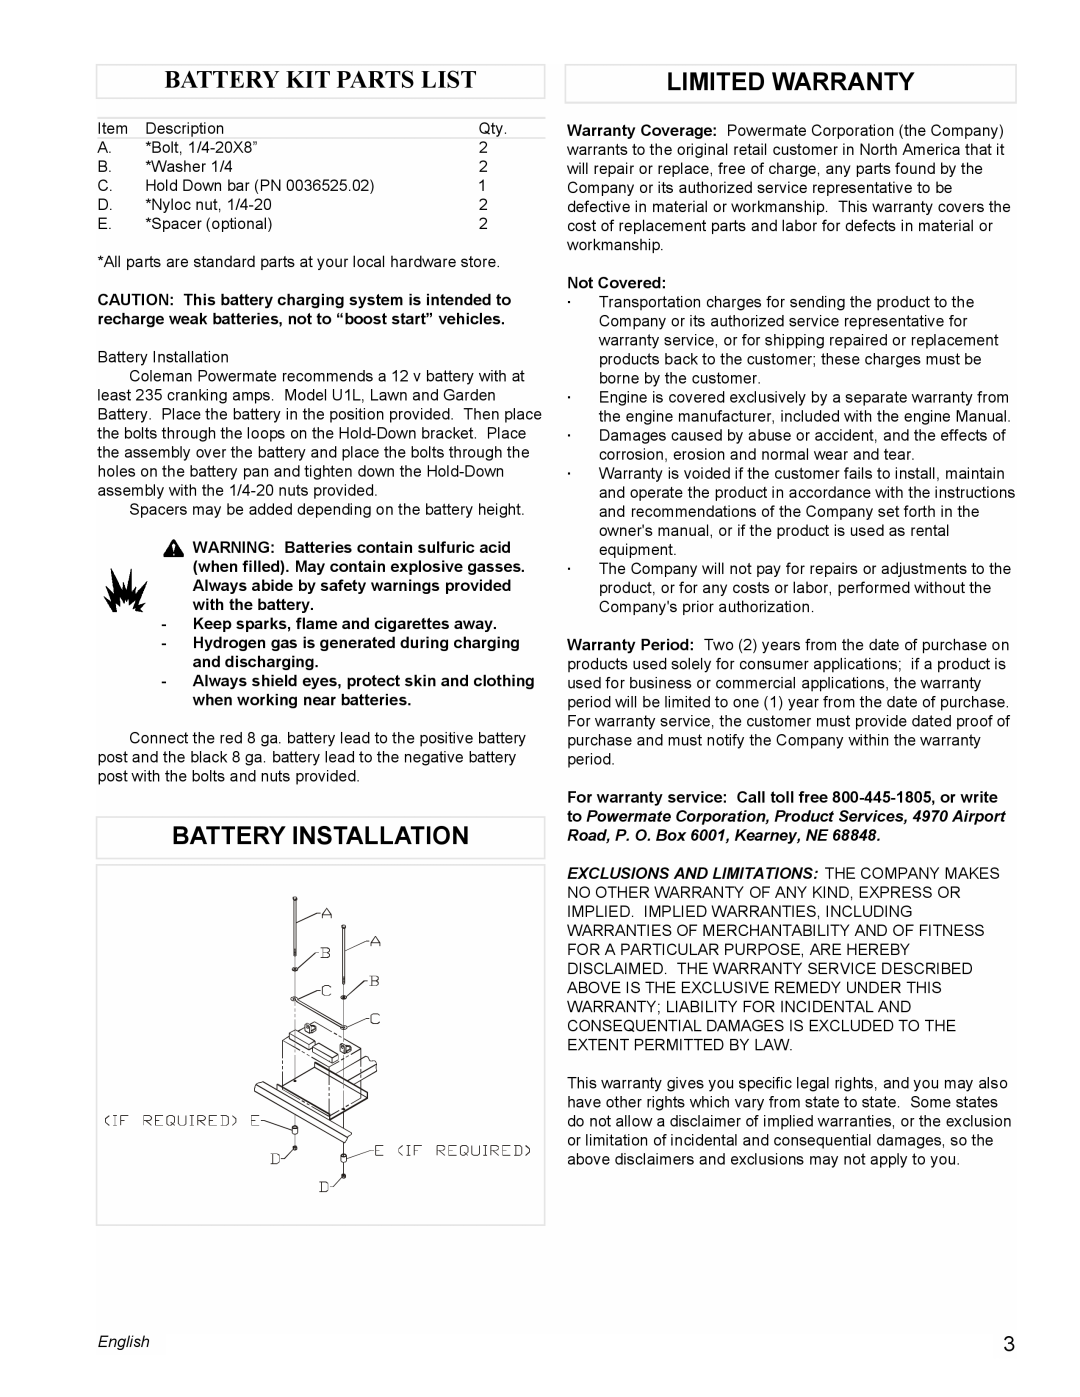 Powermate PMC505622 manual Limited Warranty, Battery Installation, Battery Kit Parts List, English 